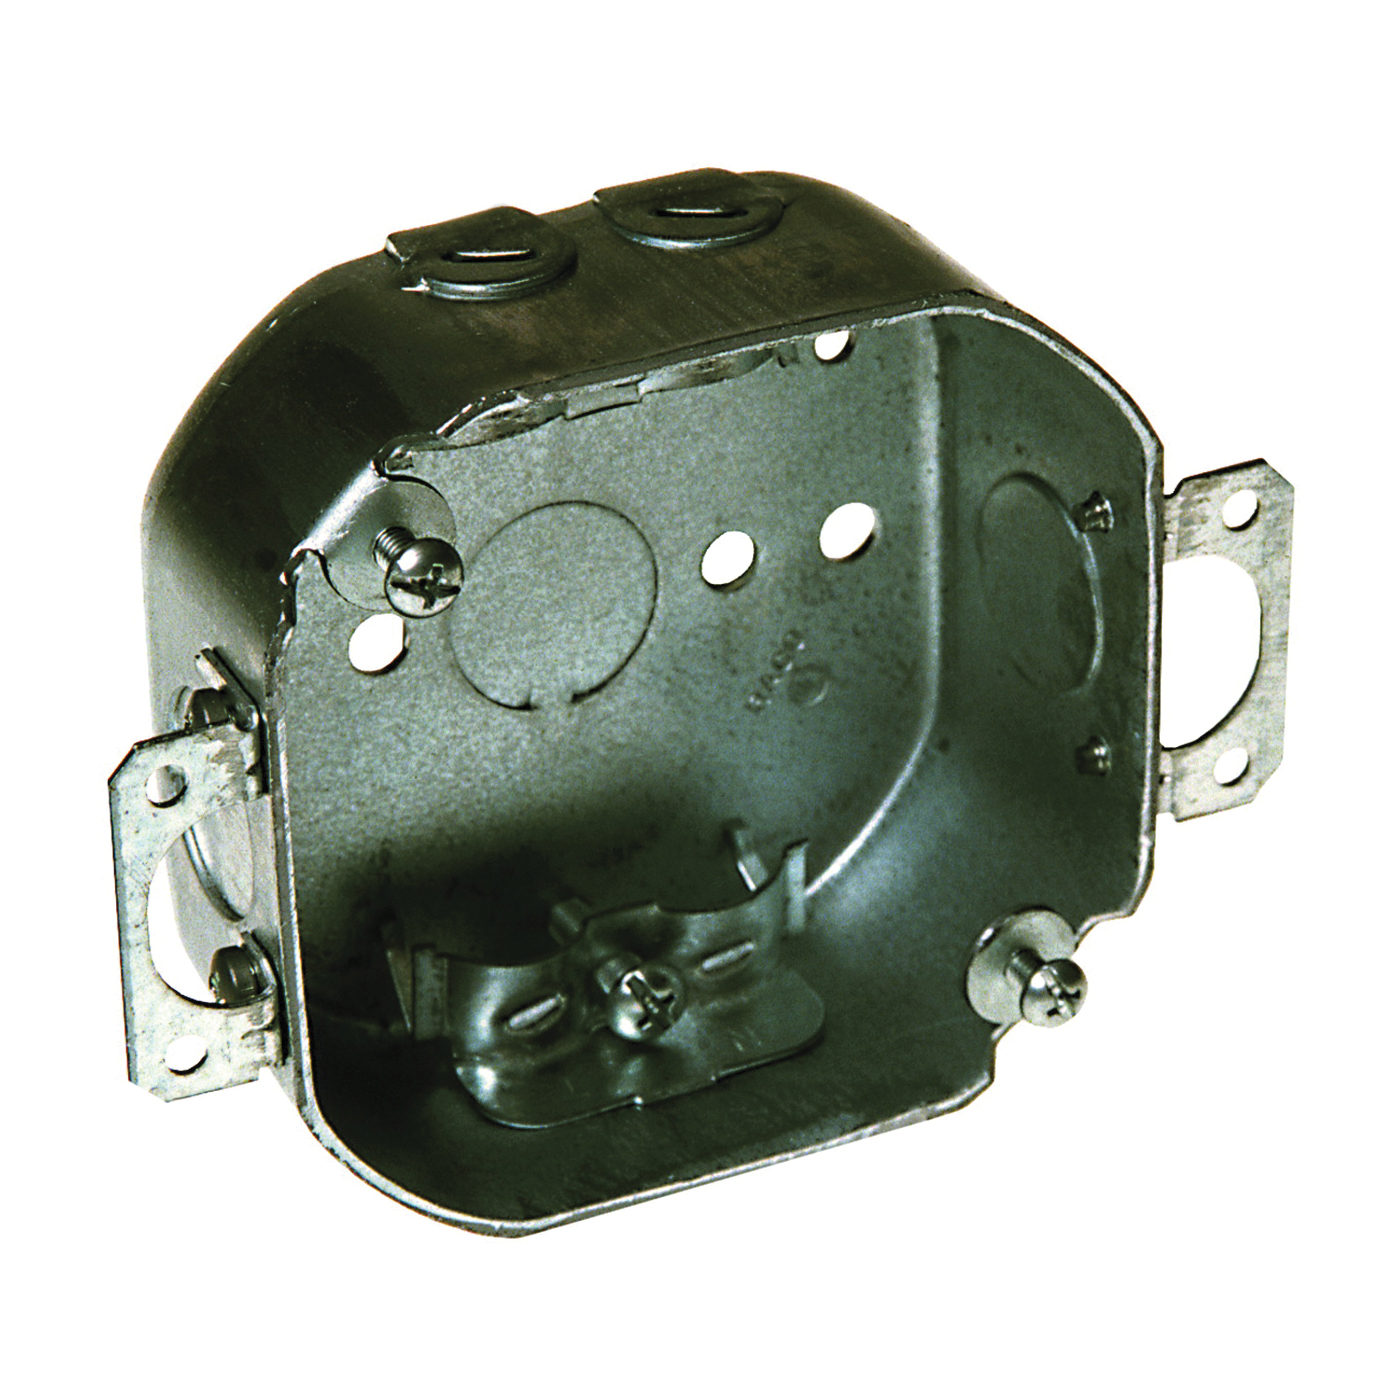 4RB-MC-E Electrical Box, 4 in OAW, 1-1/2 in OAD, 4 in OAH, 1 -Gang, 3 -Knockout, Steel Housing Material